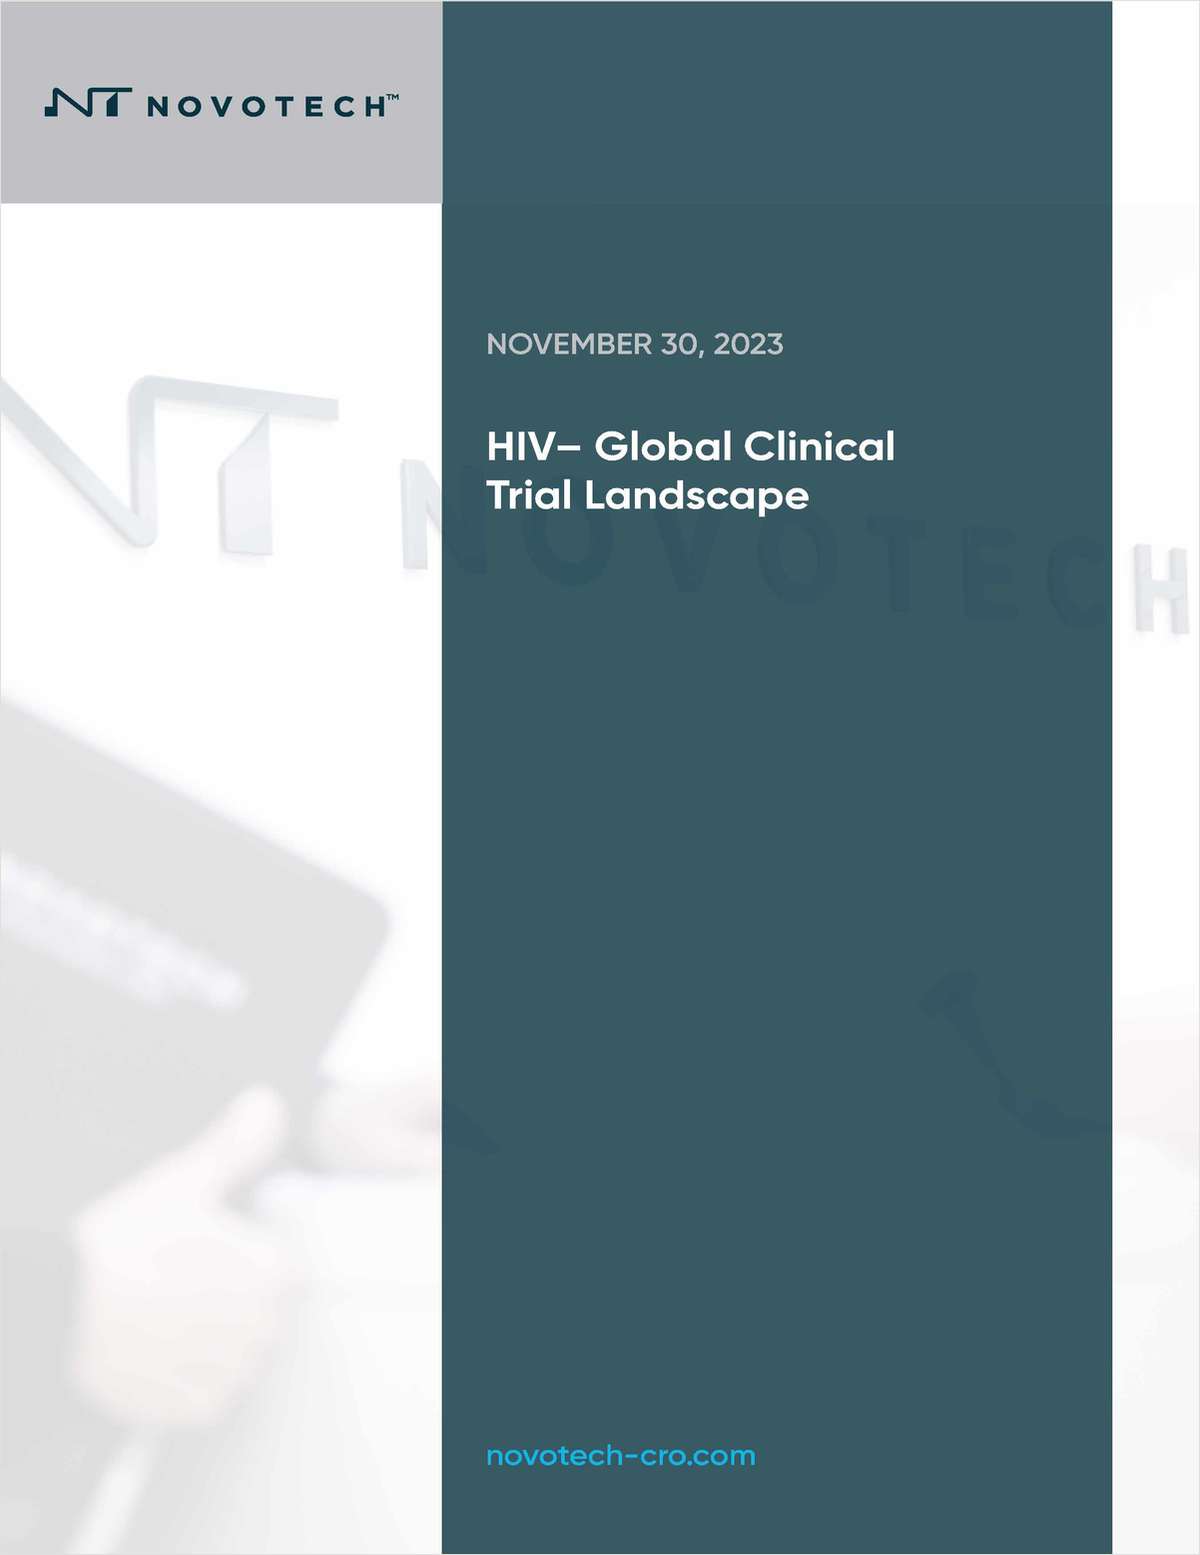 HIV-- Global Clinical Trial Landscape